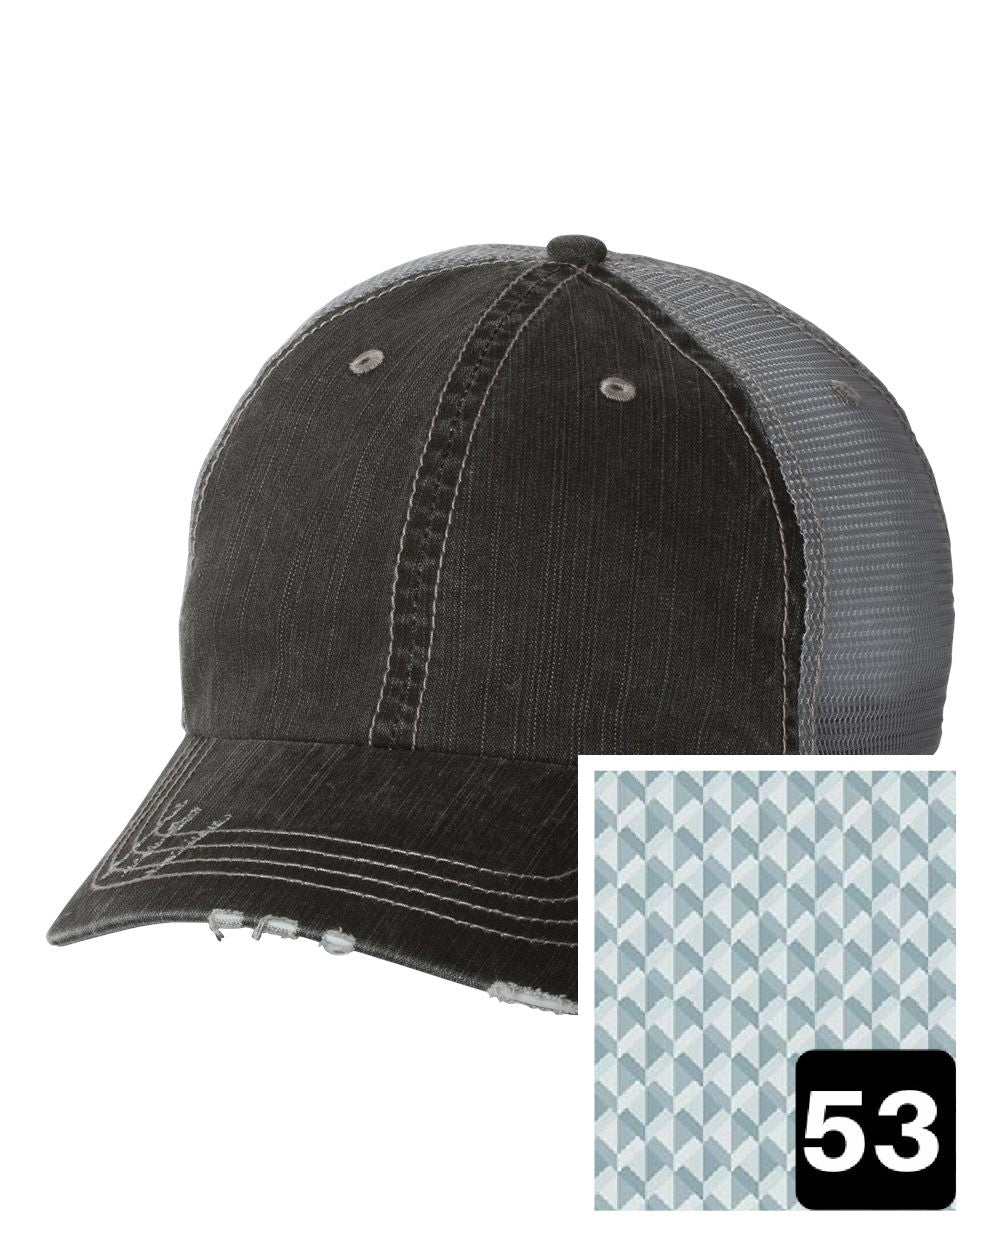 gray distressed trucker hat with multi-color stripe fabric state of Colorado